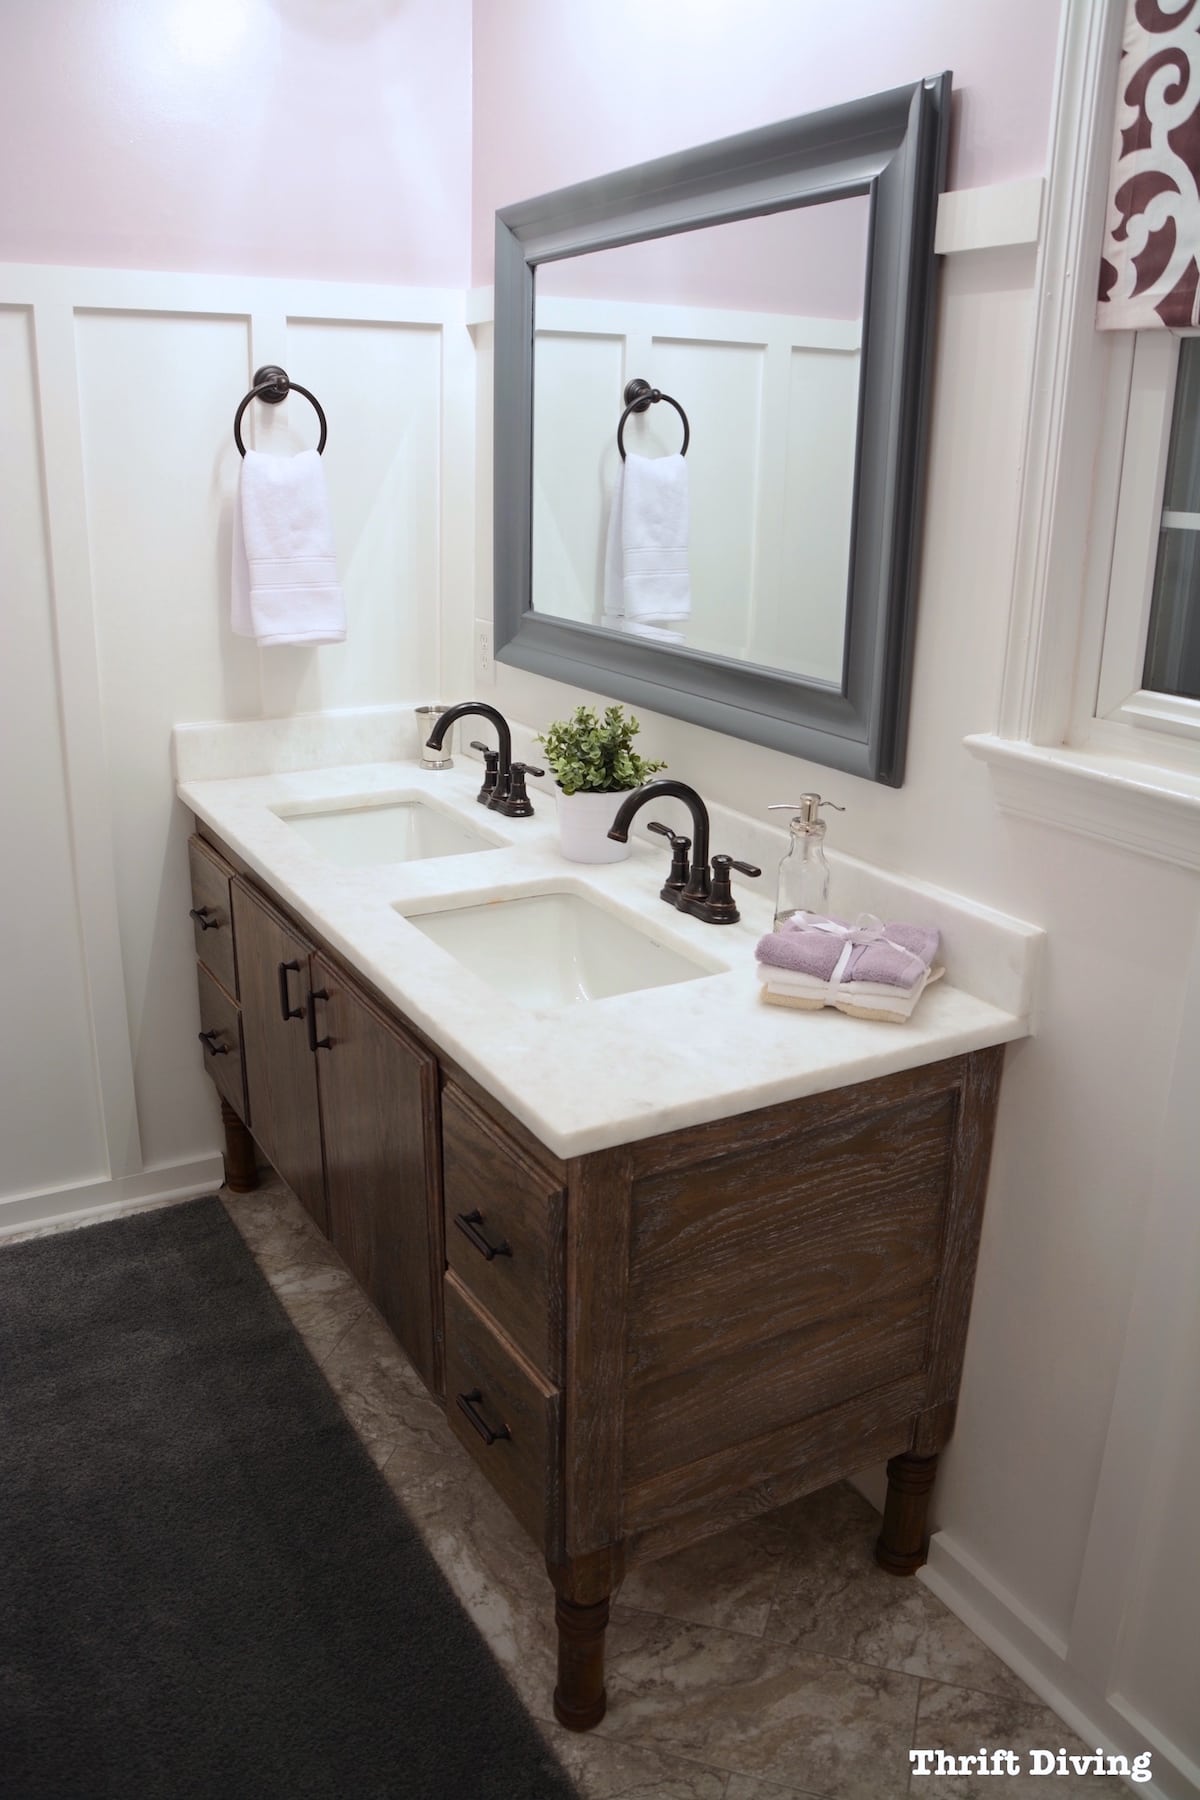 How to Repurpose Anything - Turn old legs into a DIY bathroom vanity. - AFTER - Thrift Diving